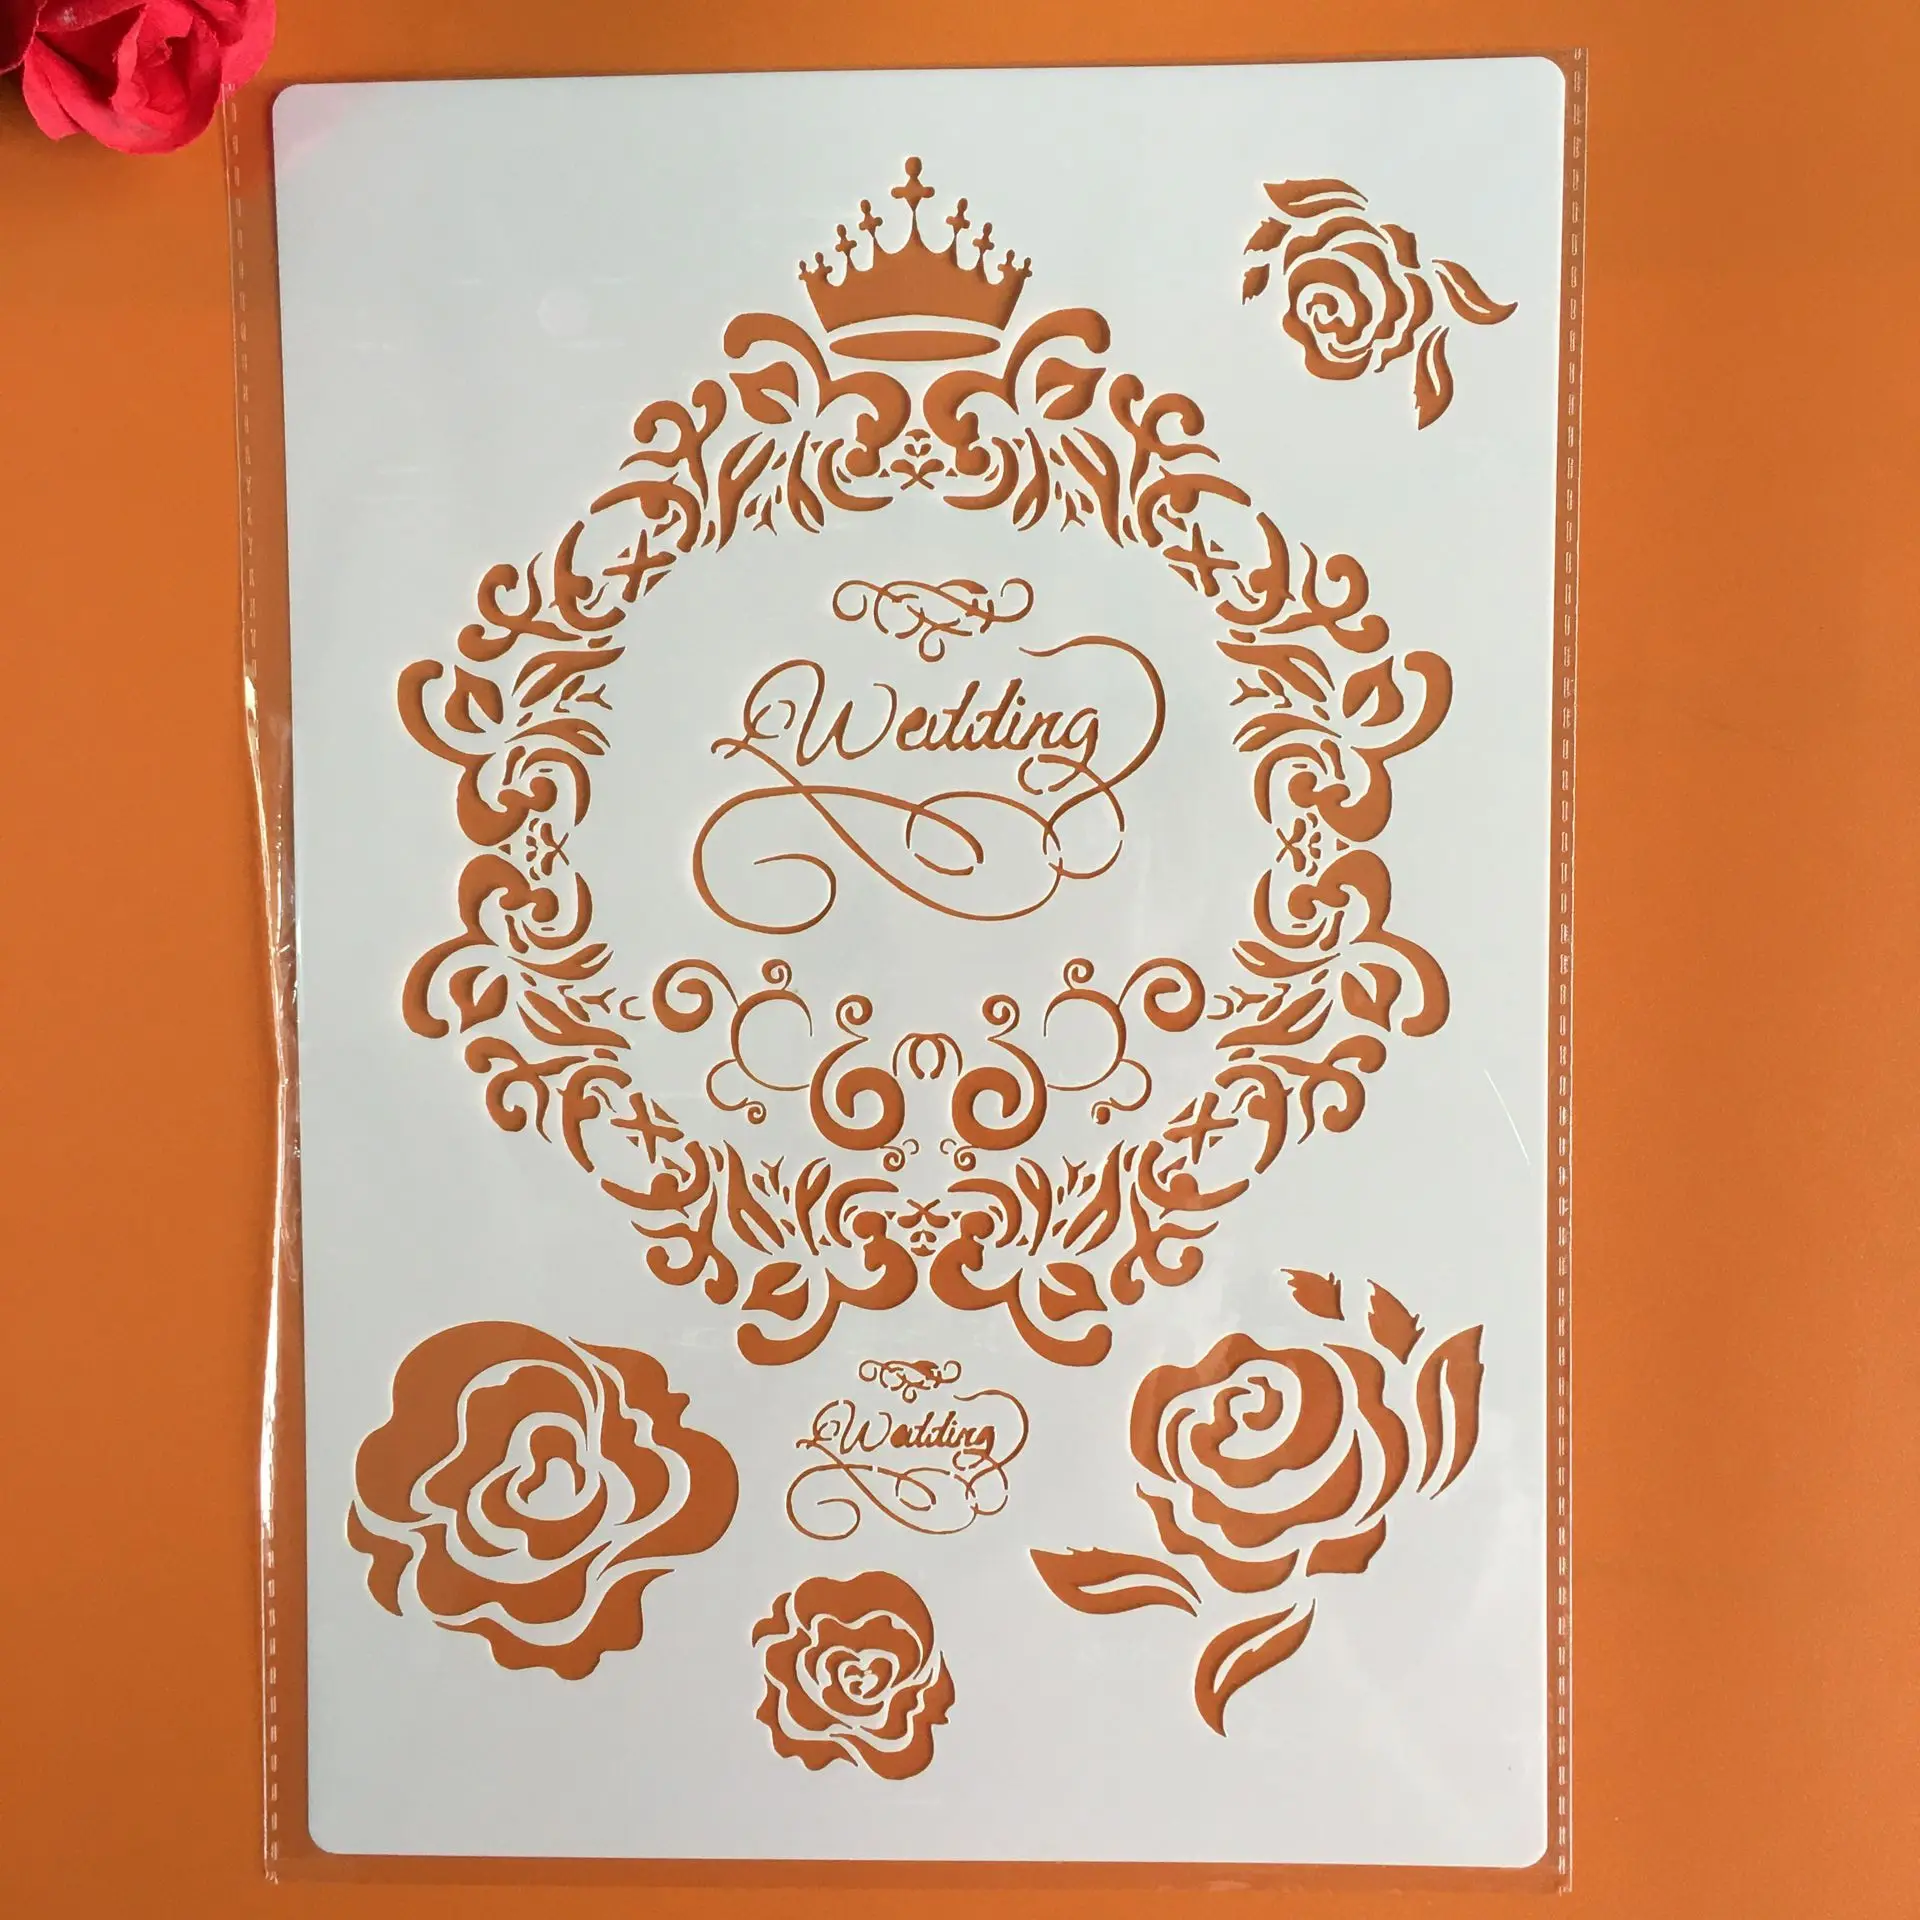 A4 29 *21cm Flowers Crown rose DIY Stencils Wall Painting Scrapbook Coloring Embossing Album Decorative Paper Card Template,wall